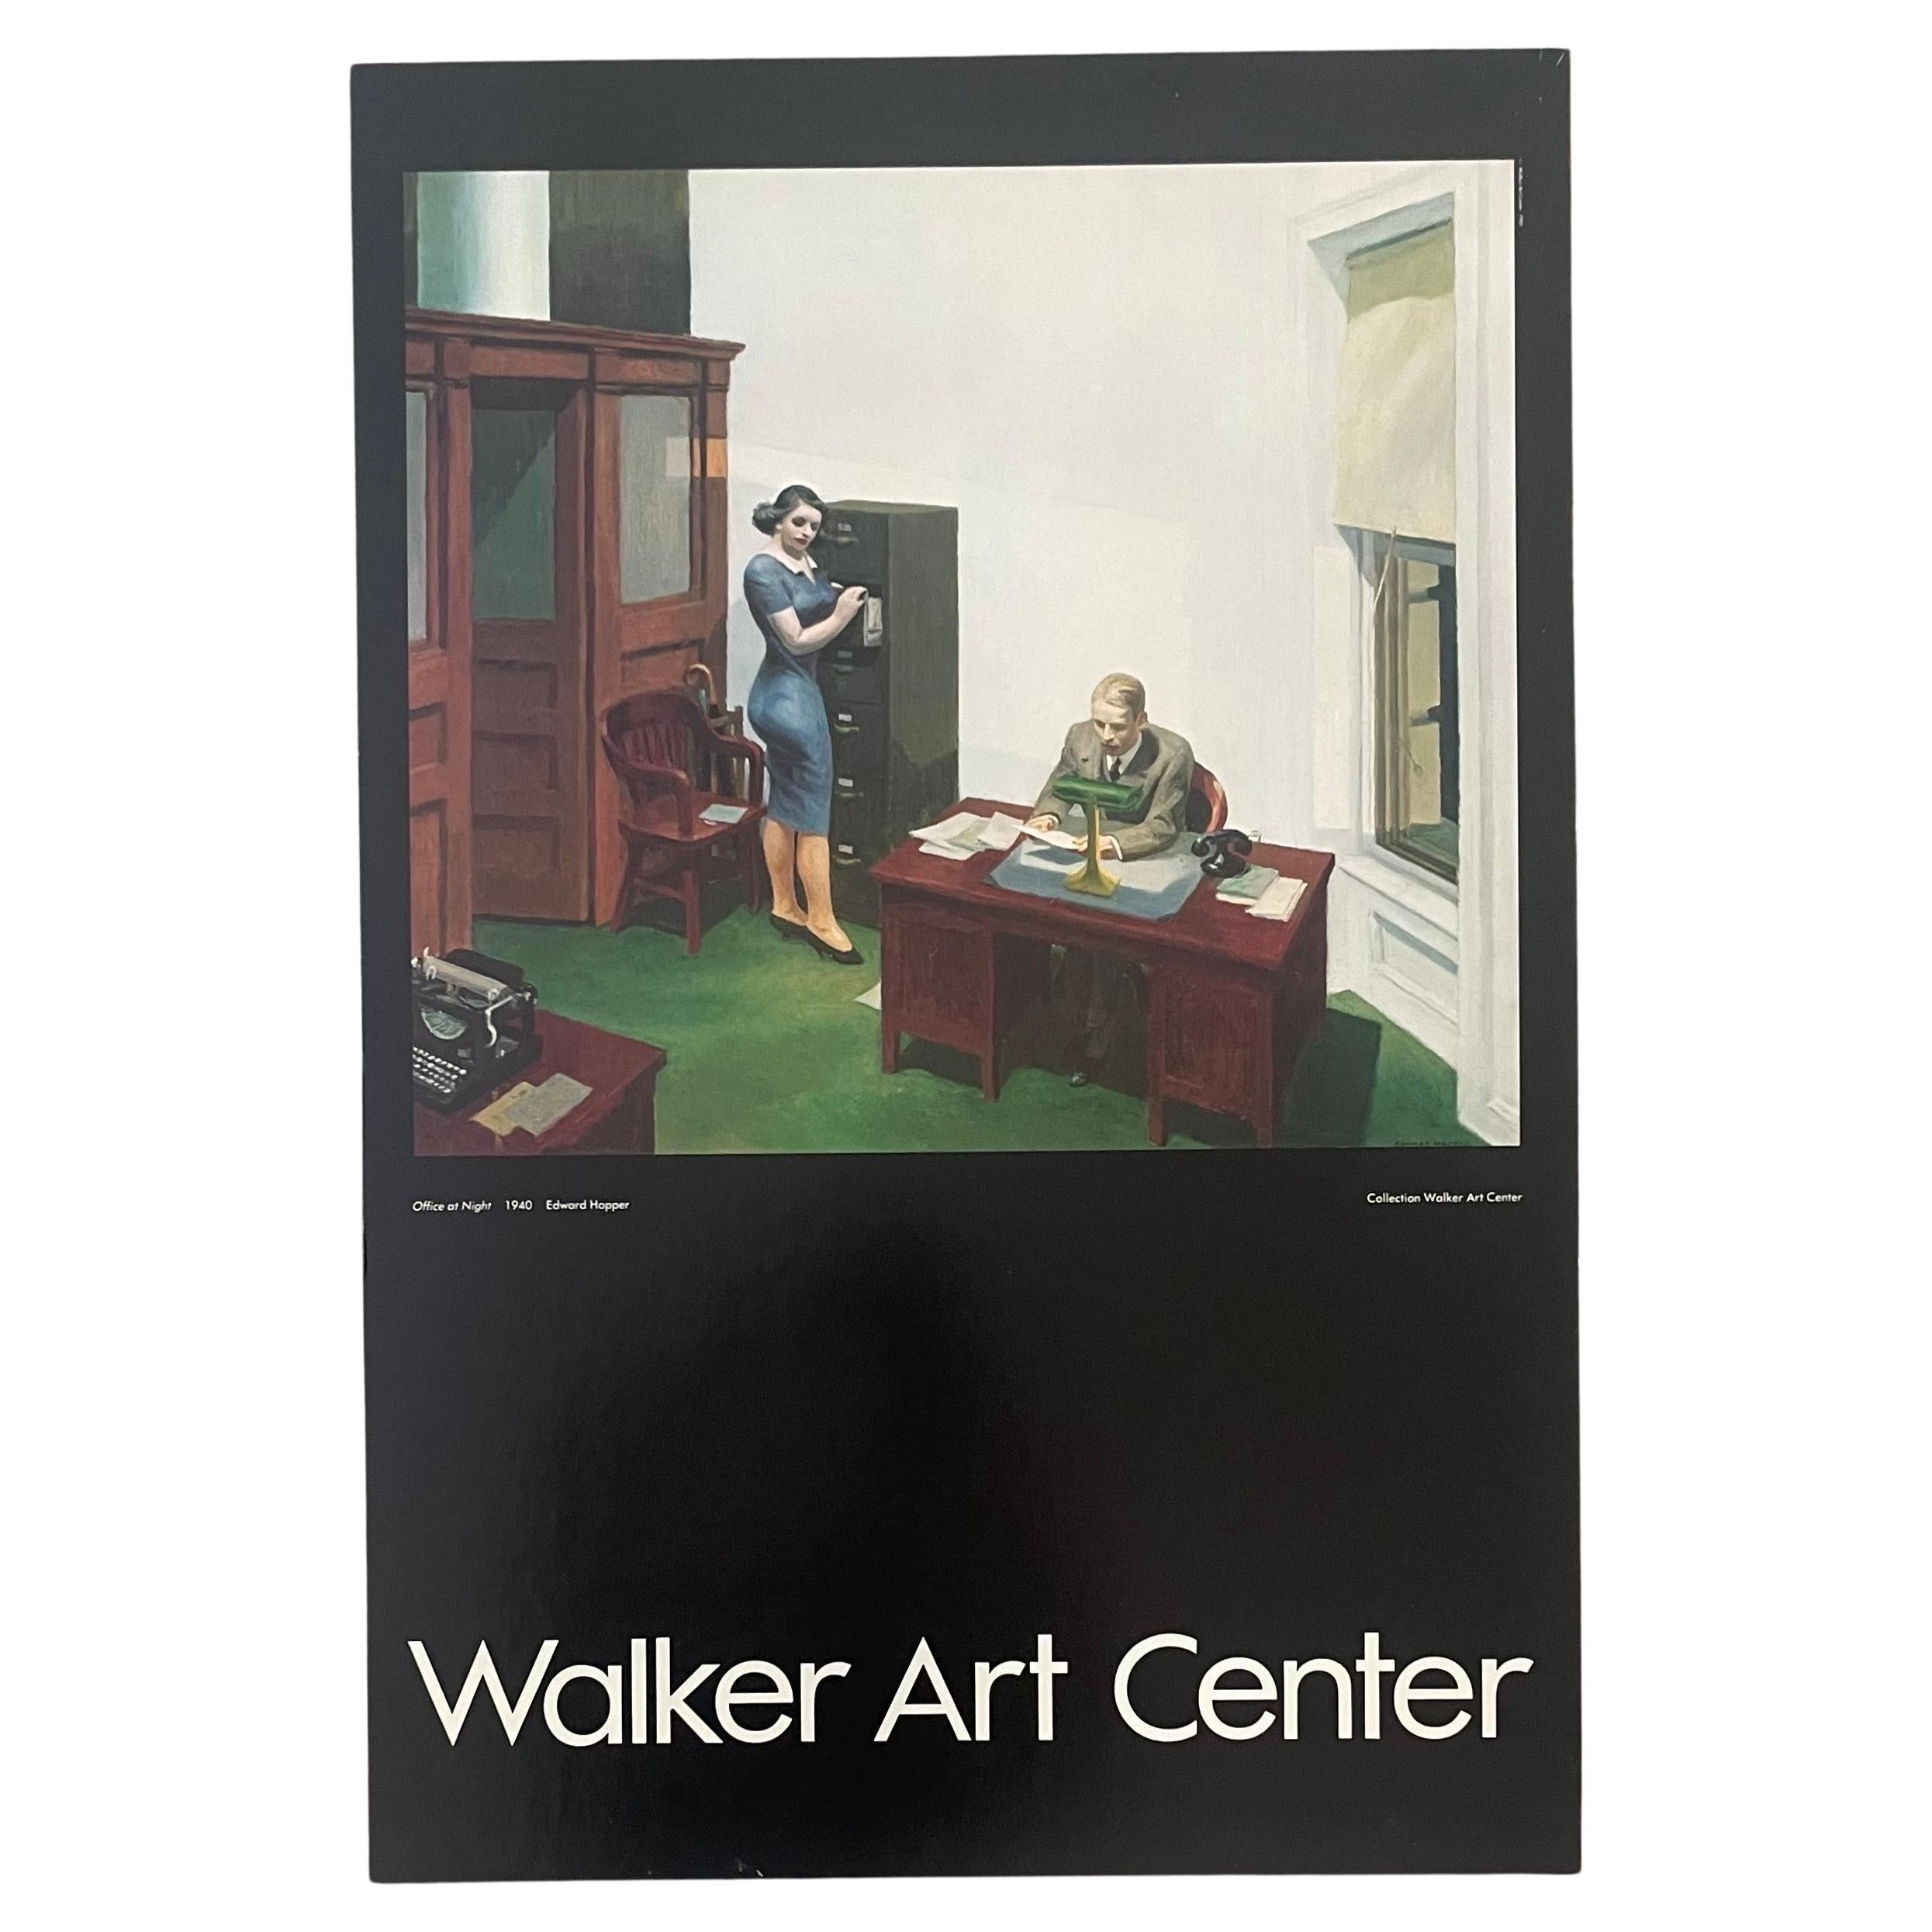 "Office at Night" from Walker Art Center Lithograph / Poster by Edward Hopper